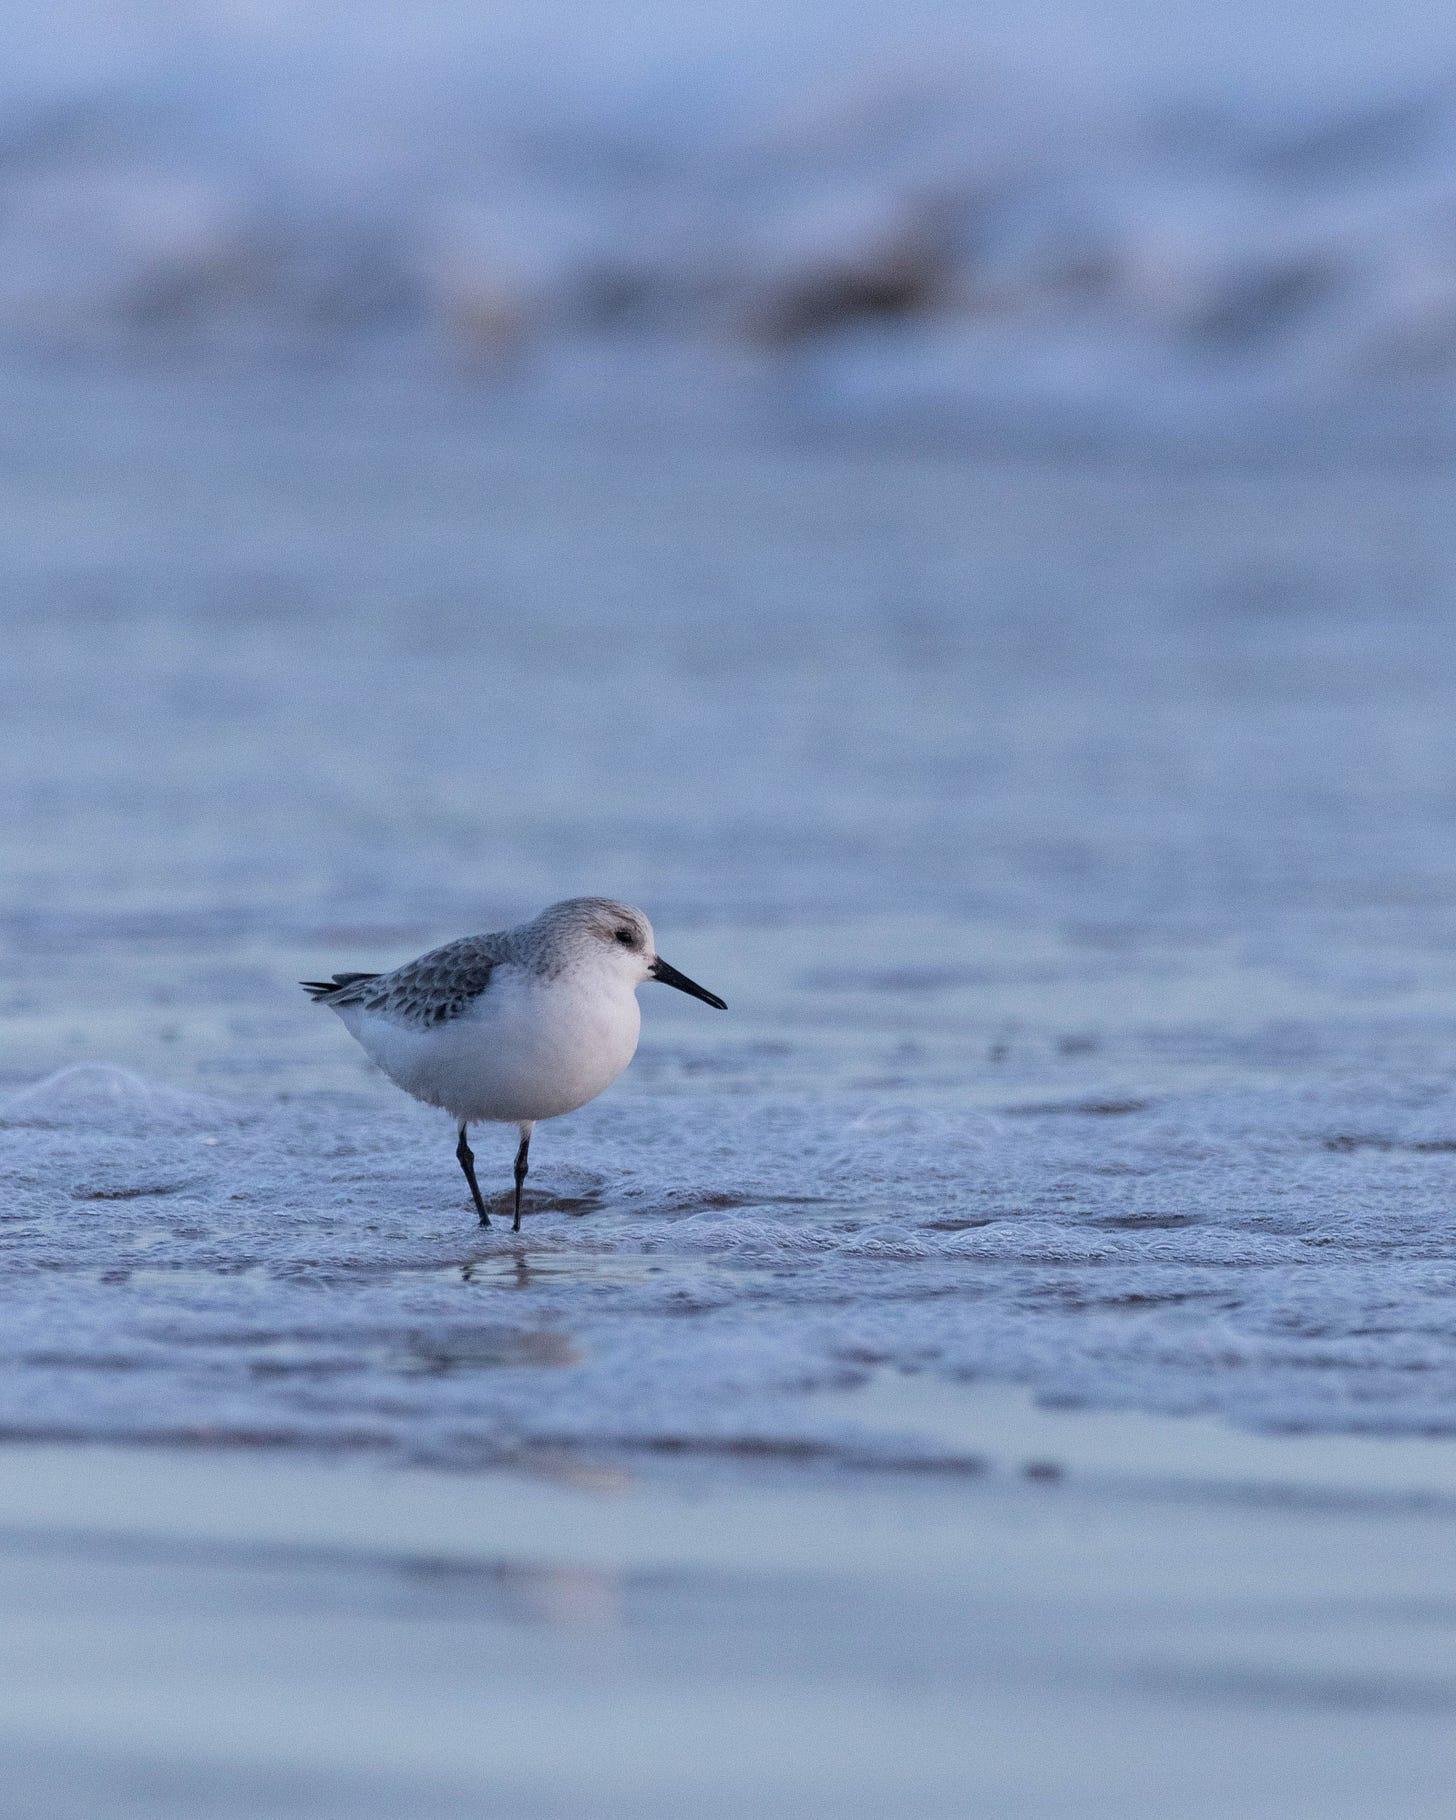 A sanderling stood at the edge of the waves.